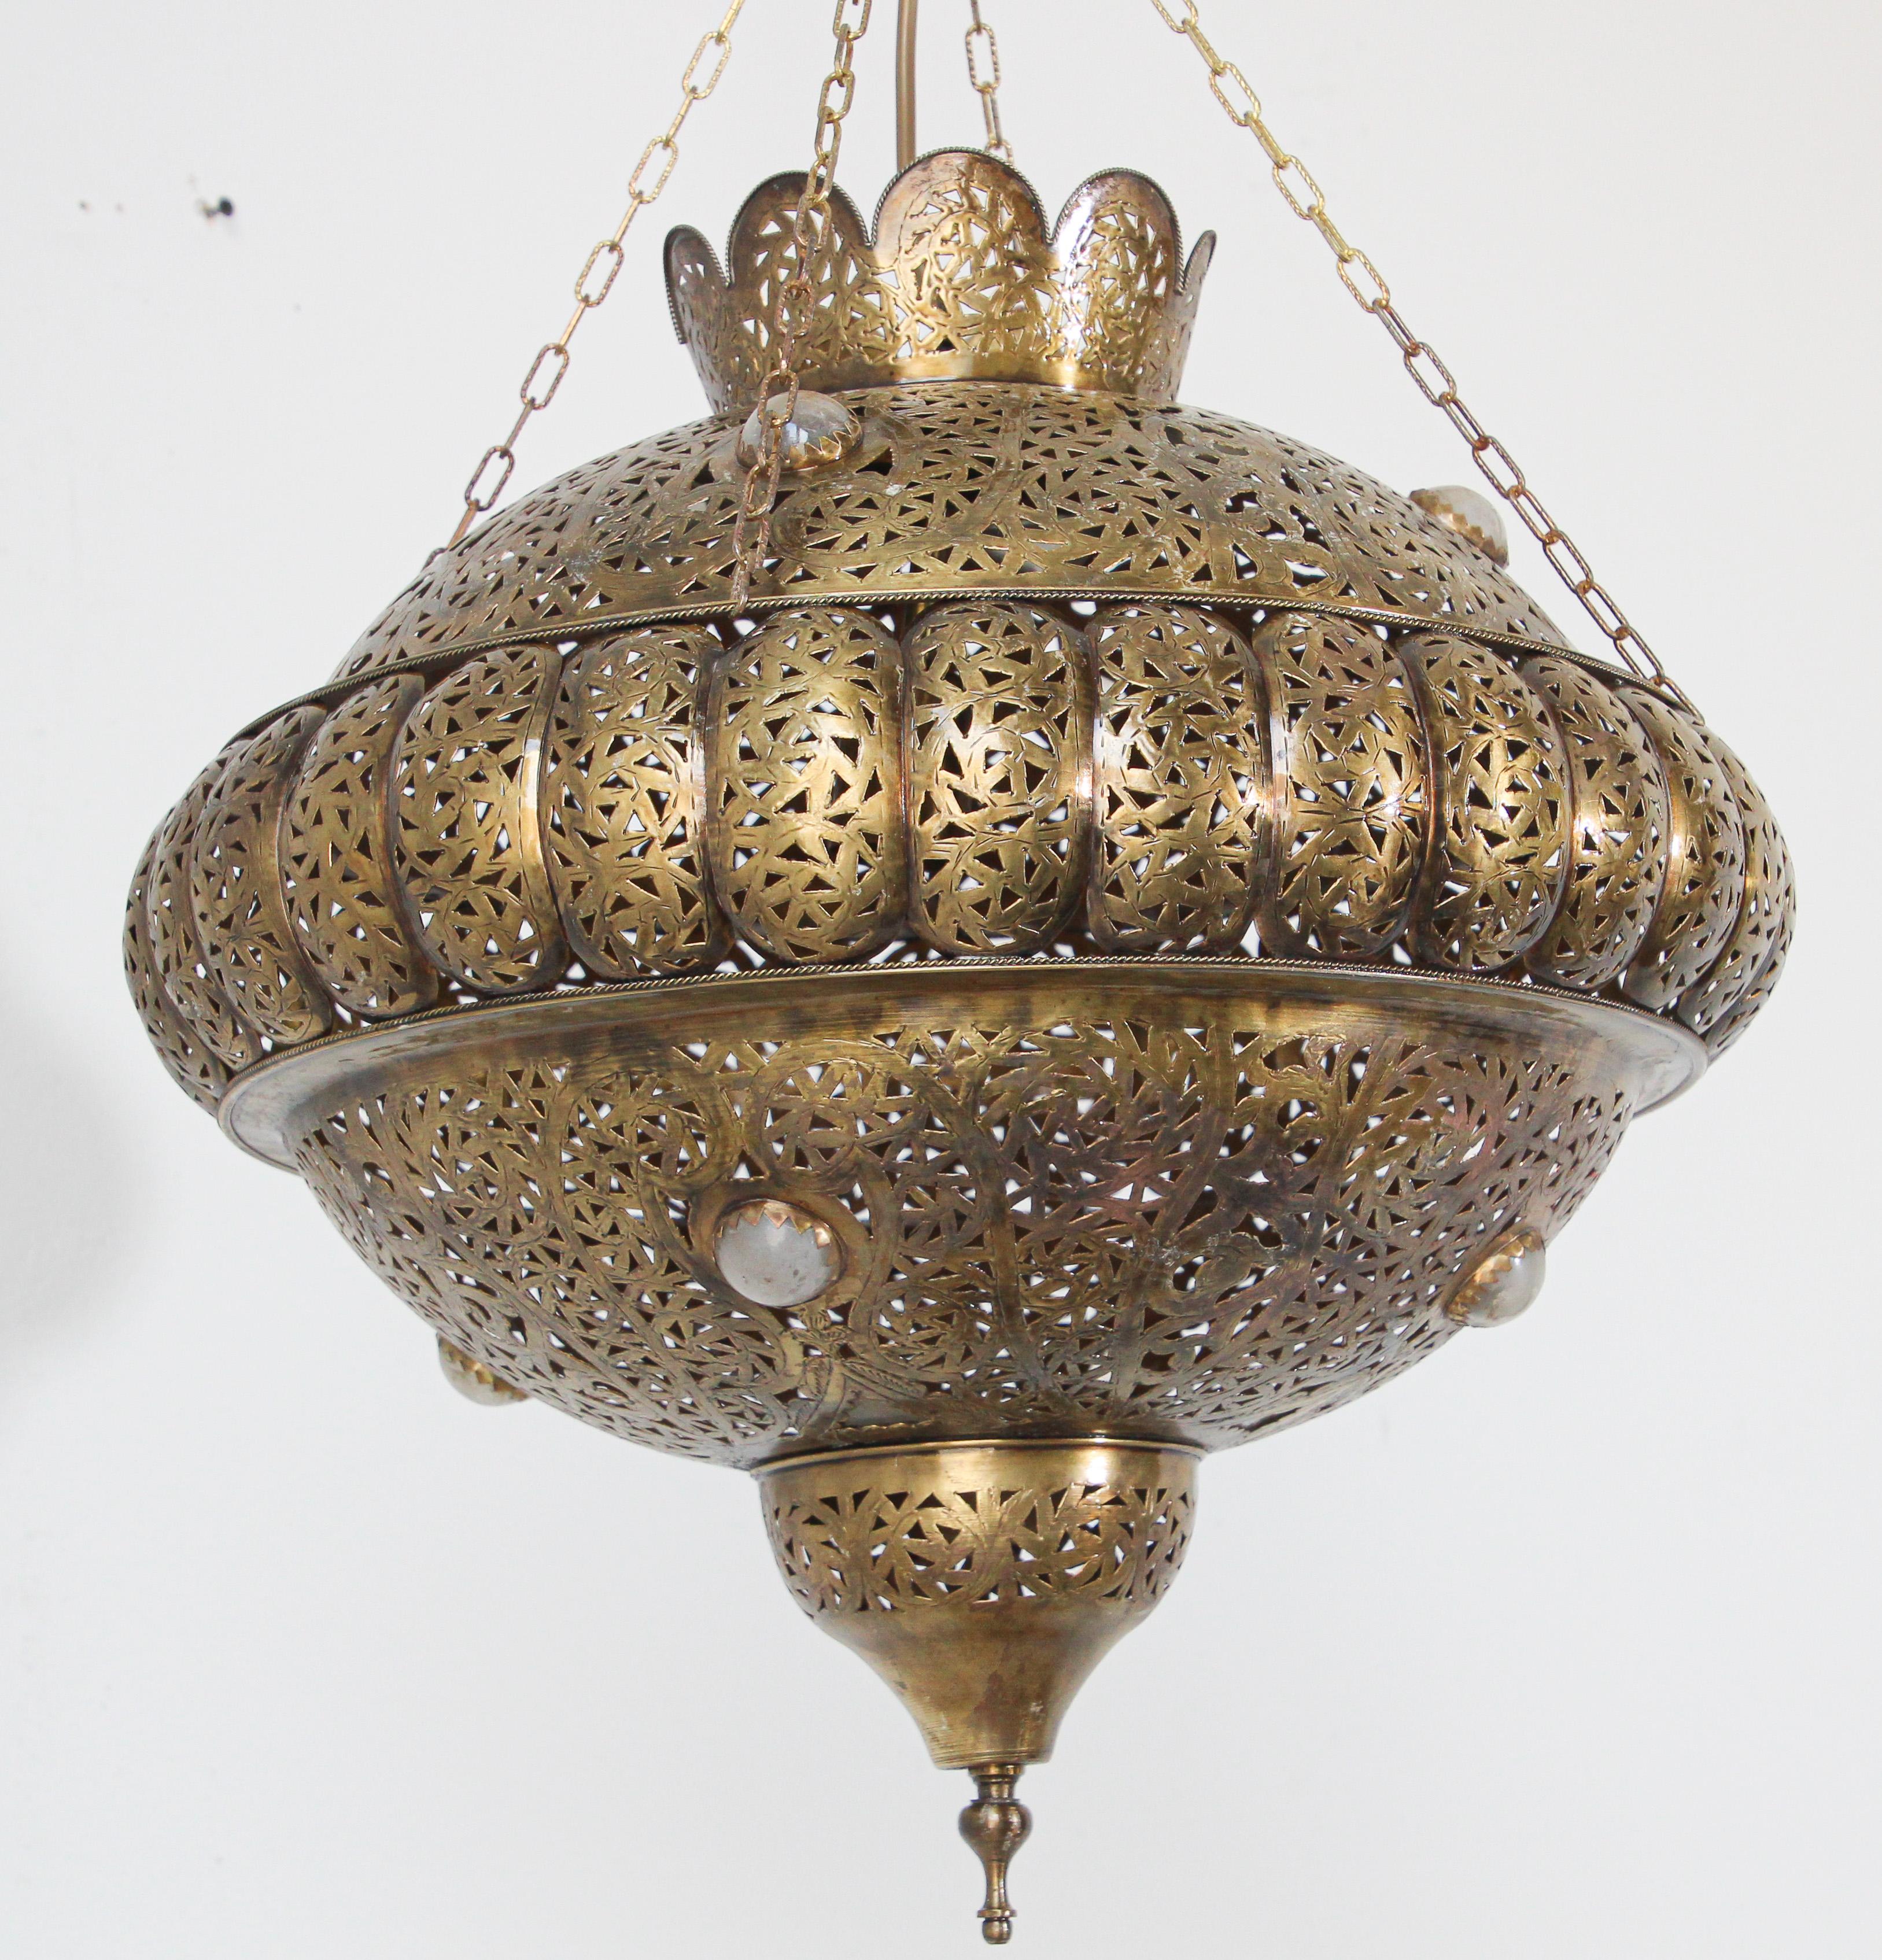 Moroccan brass pendant in the style of Alberto Pinto Moorish design.
This Moorish light fixture is delicately handcrafted and chiseled with Fine filigree designs by skilled Moroccan artisans.
Rewired for a single light source one socket up to 60